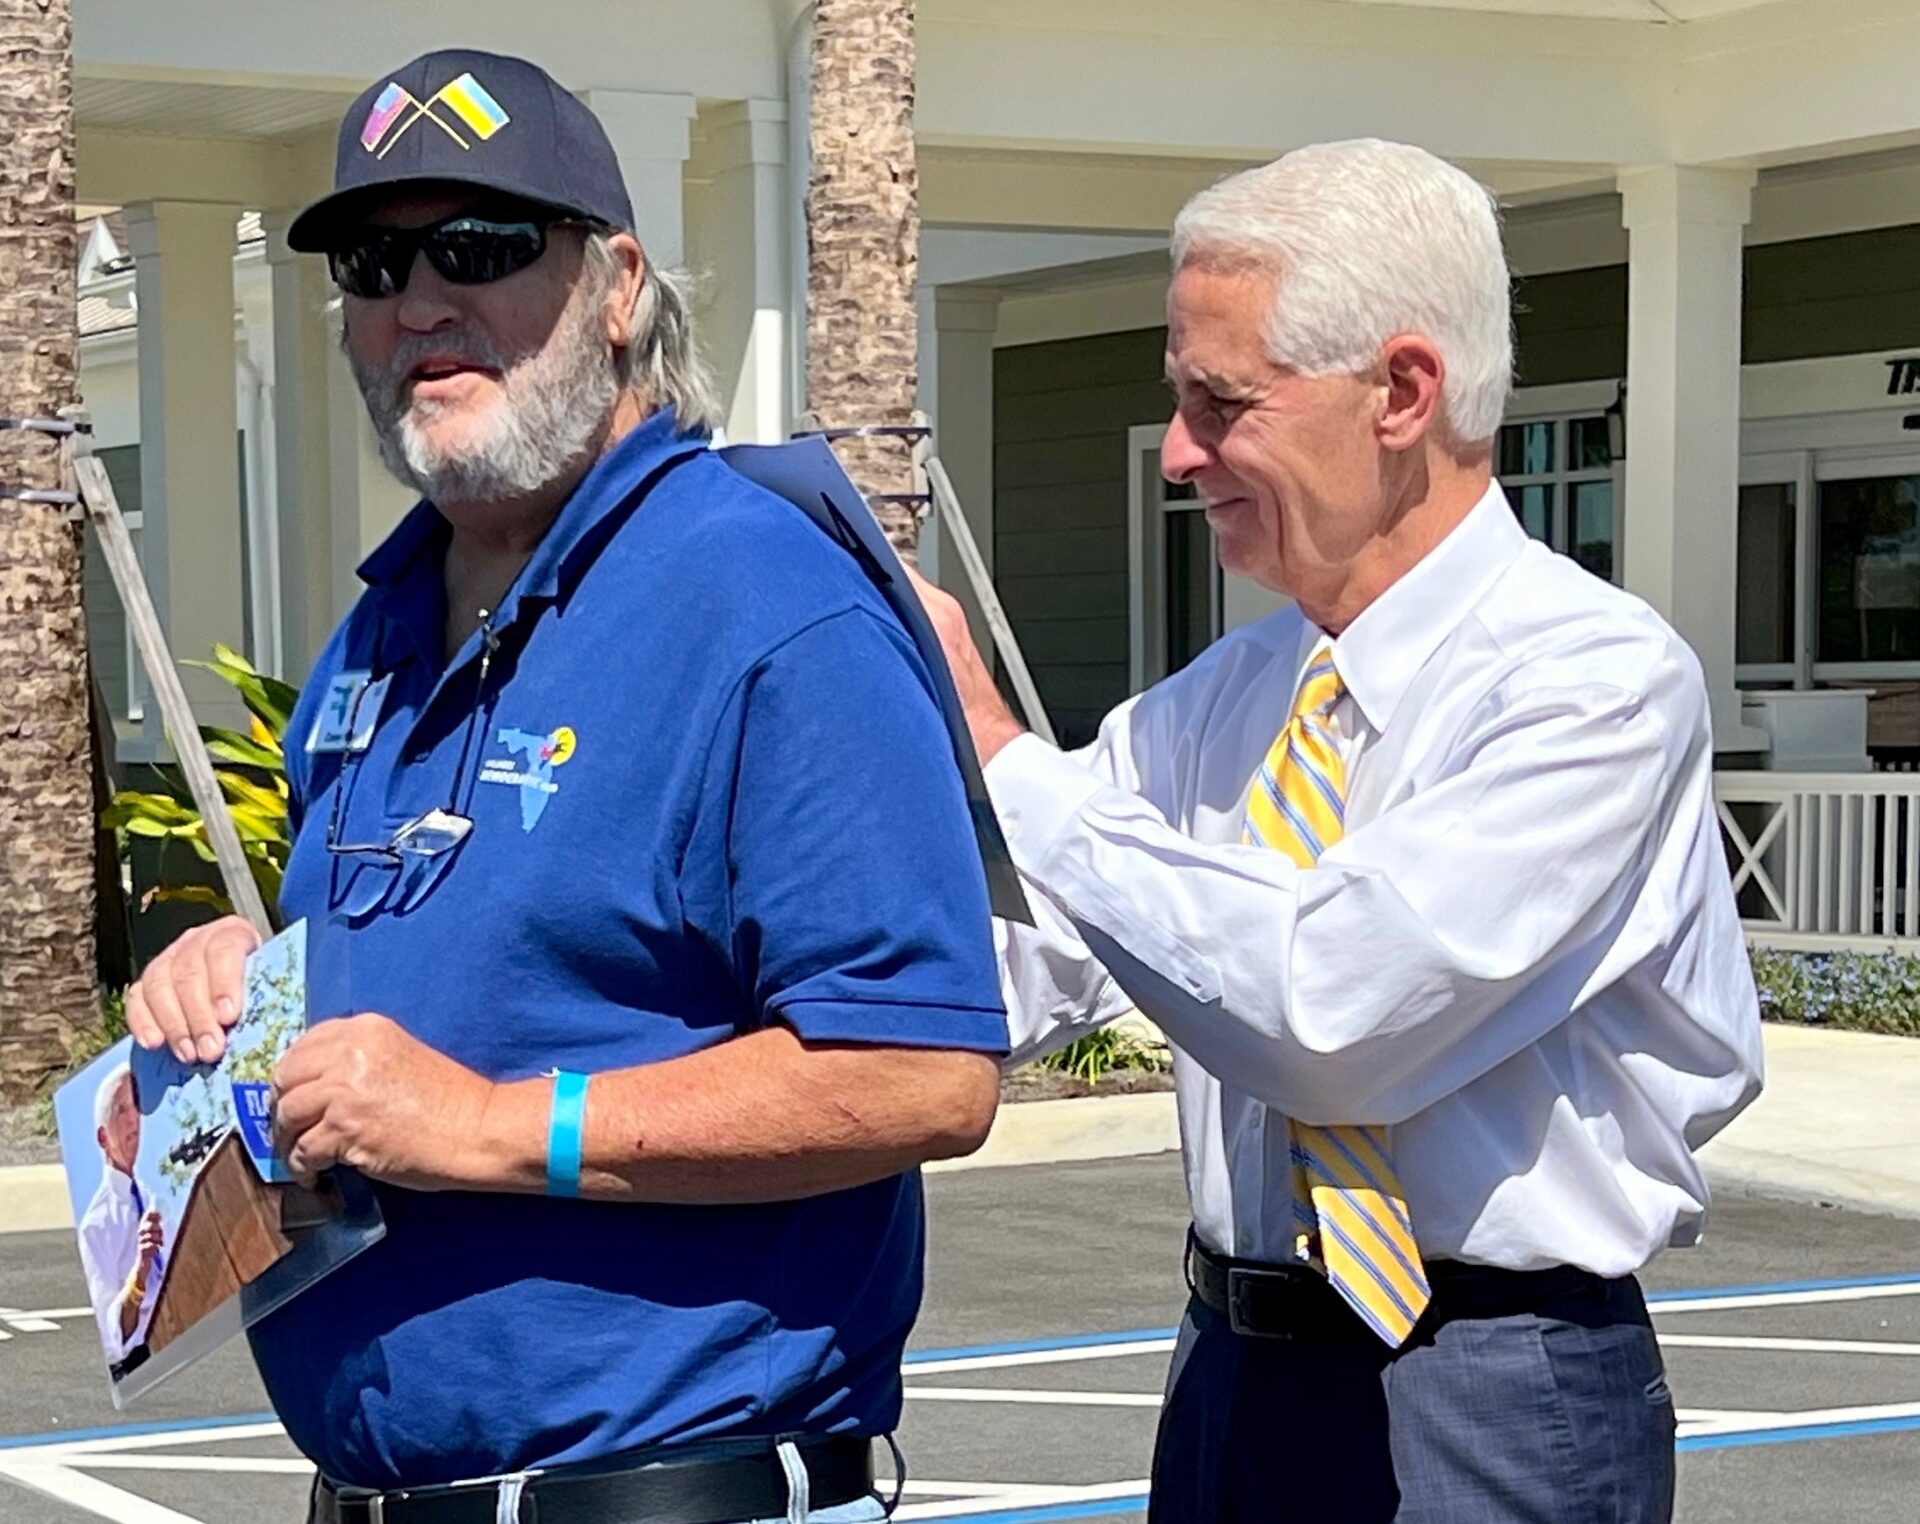 Charlie Crist right signs an autograph for Villager Casey Marr